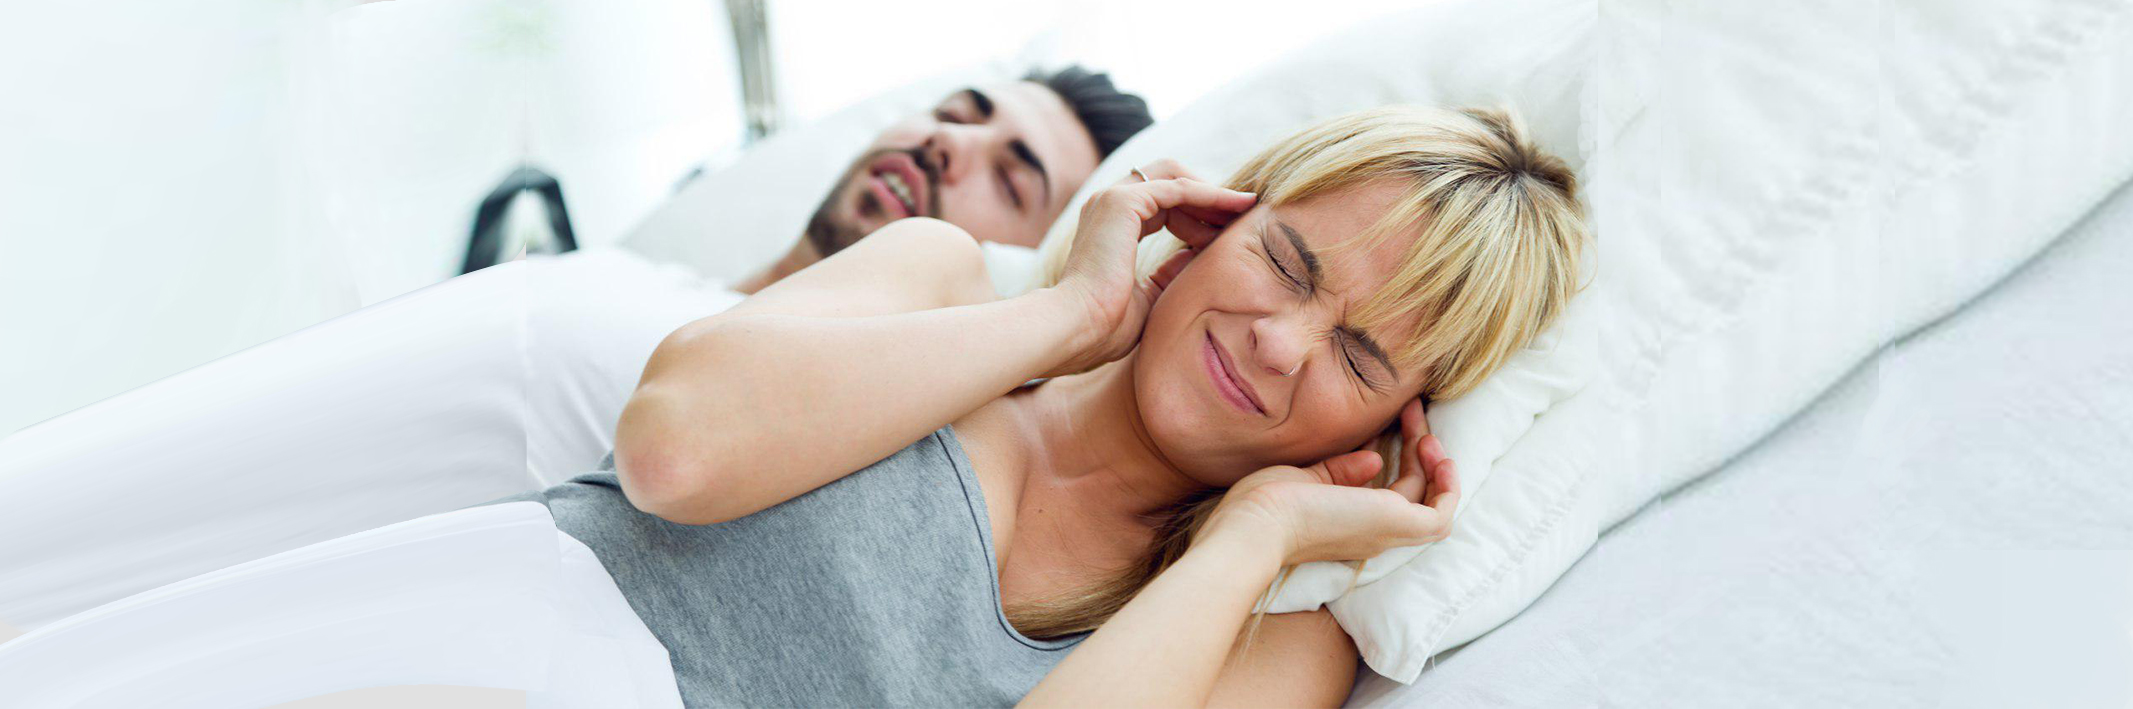 Could Snoring Signal a More Serious Condition?